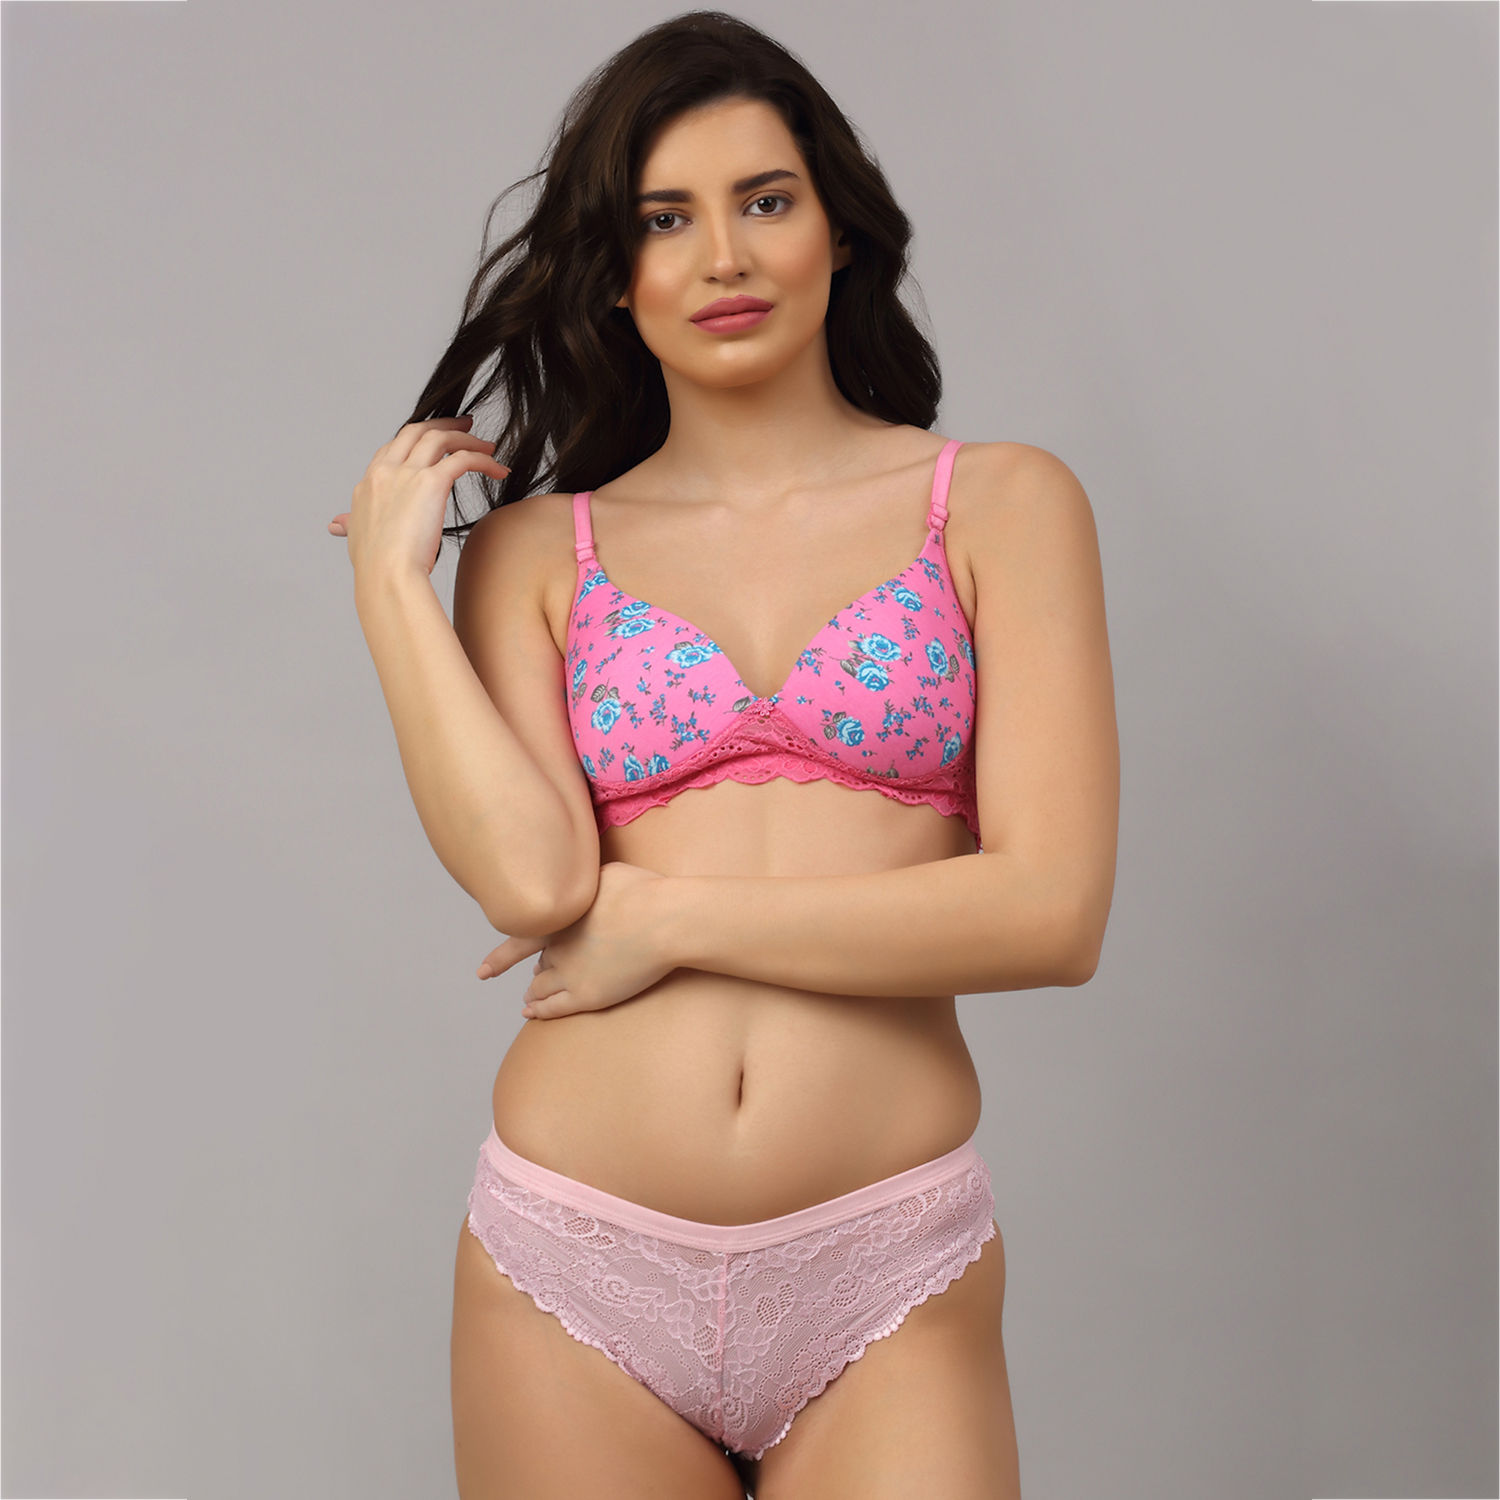 Buy Quttos PrettyCat Padded Lace Tshirt Bra Panty Set Pink at